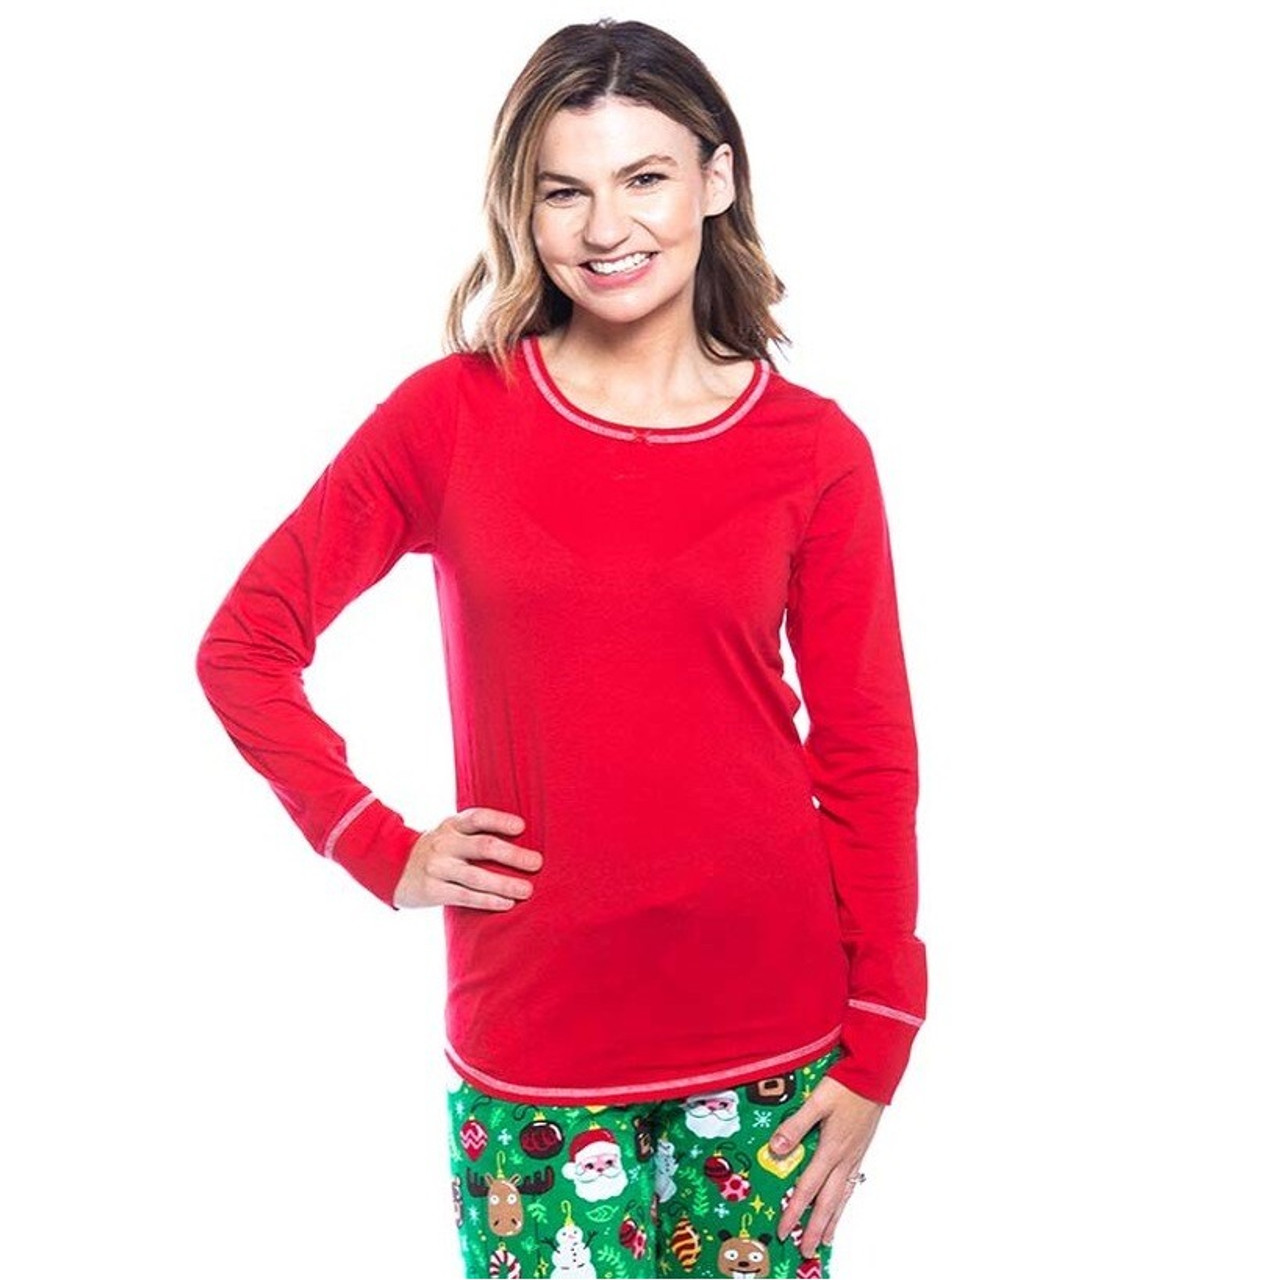 https://cdn11.bigcommerce.com/s-c9a80/images/stencil/1280x1280/products/7567/24611/Hatley_Womens_Stretch_Jersey_Pajama_Top__85957.1657580883.jpg?c=2